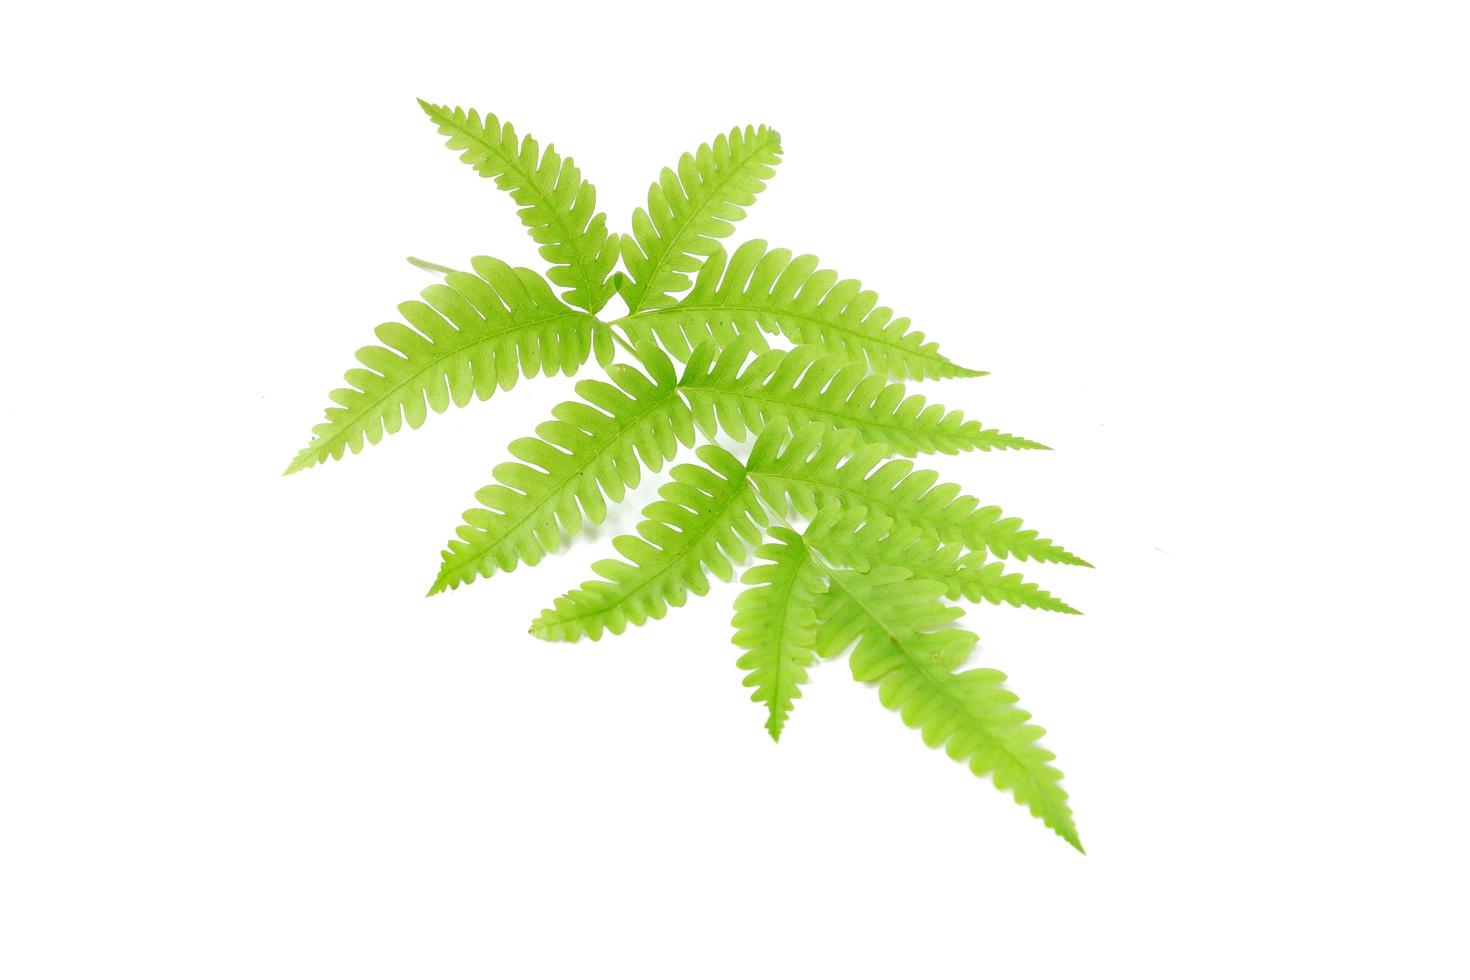 Fern leaf isolated on a white background photo